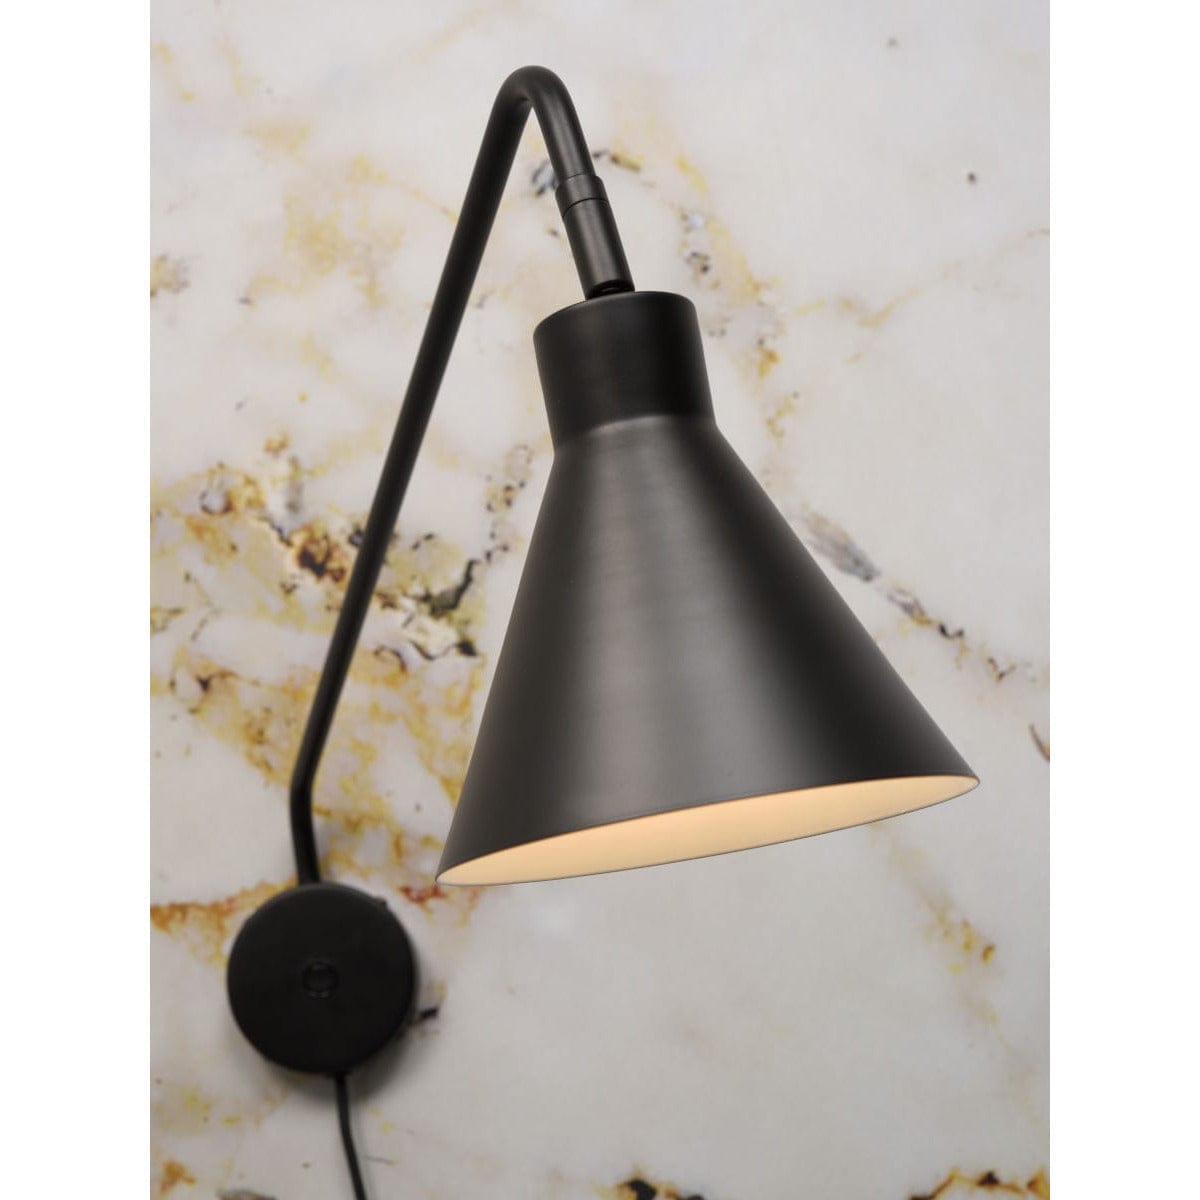 It's About RoMi Wall Lights Lyon Wall Lamp, Black or Gold